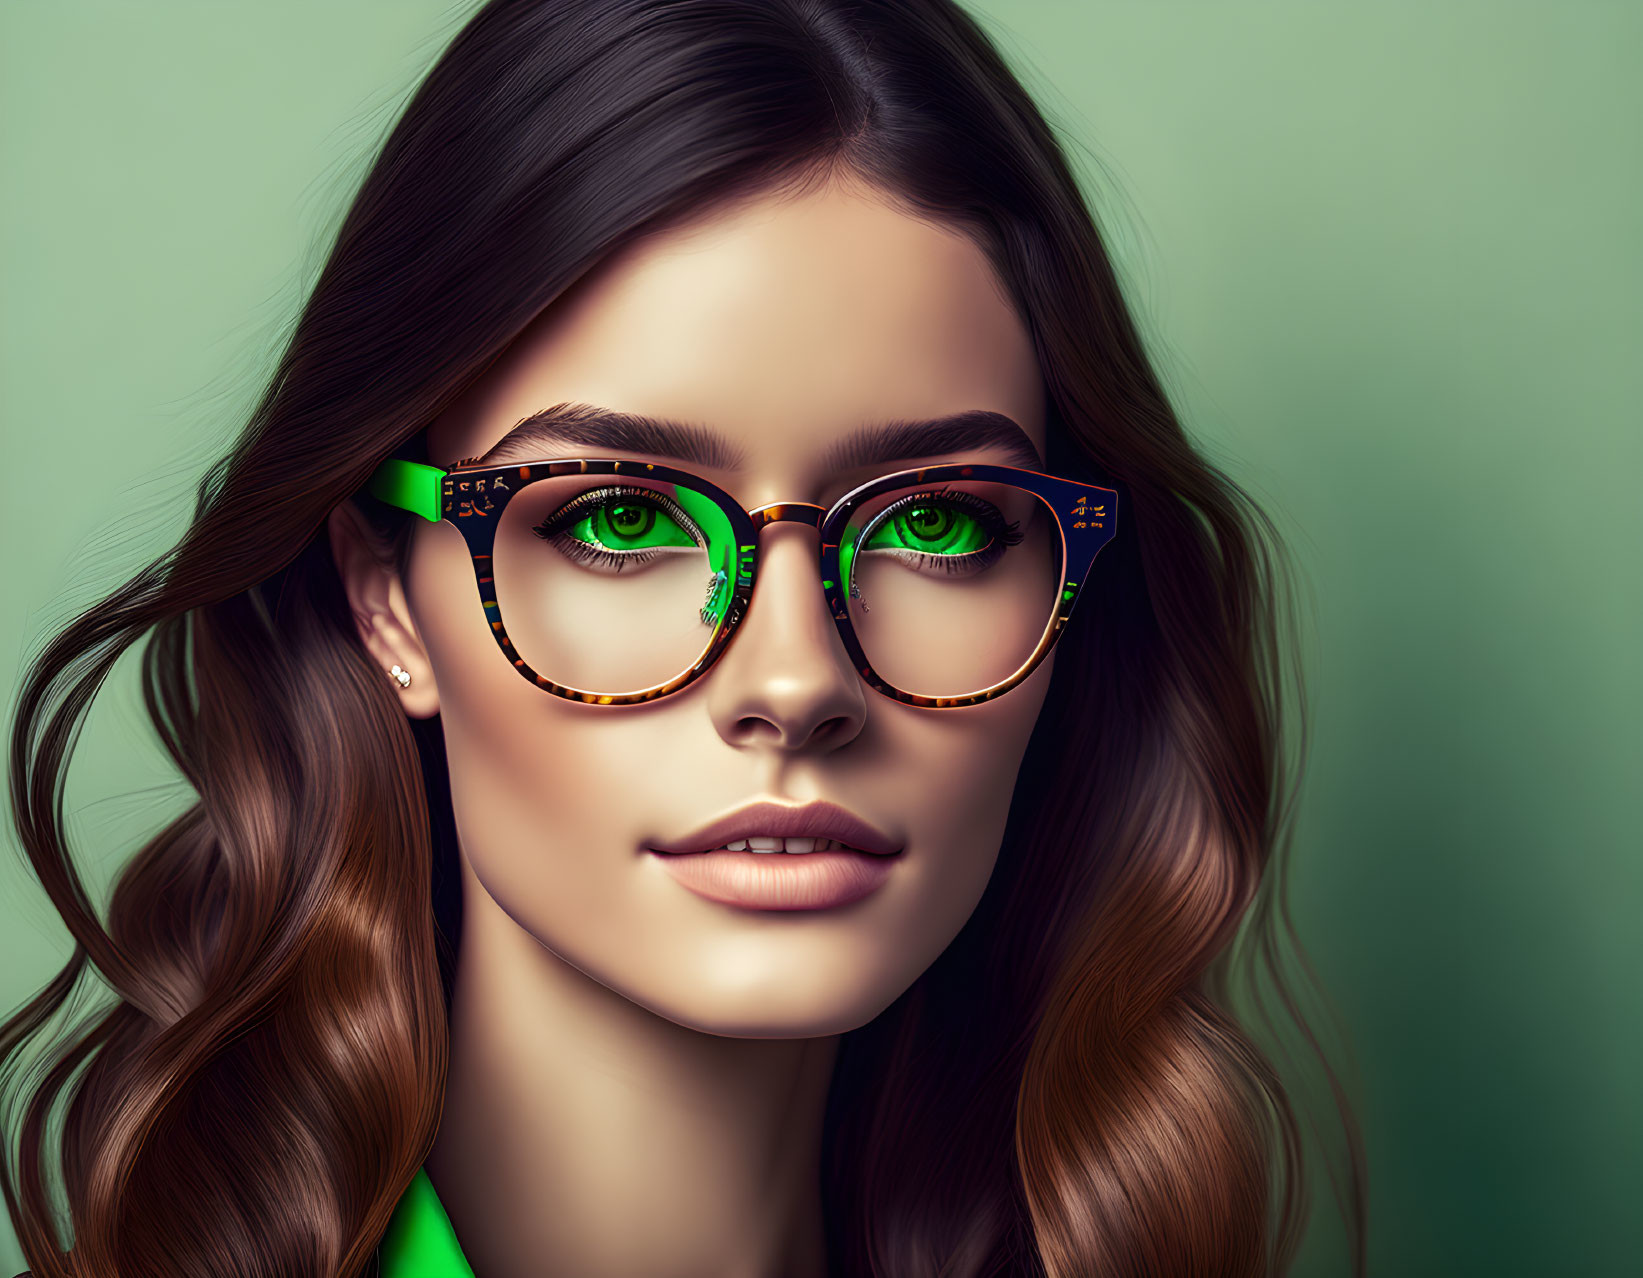 Portrait of a very smart girl with glasses